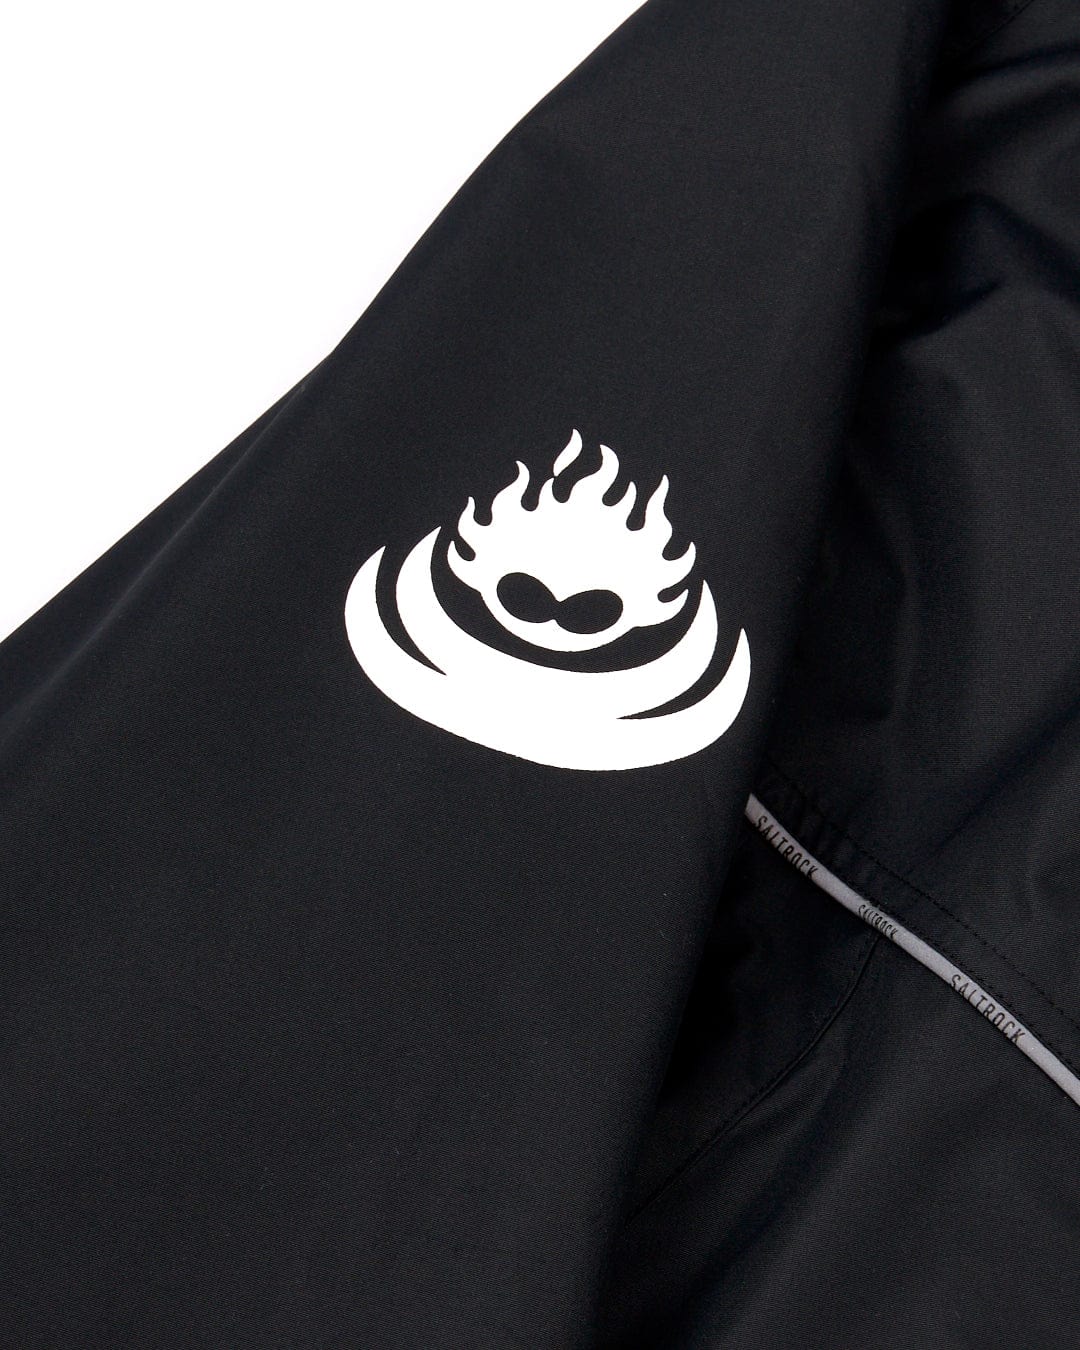 Black fabric with a white stylized logo featuring a flame design, partially obscured by a zipper edge on a Saltrock 3 in 1 Recycled Four Seasons Changing Robe - Black/Yellow.